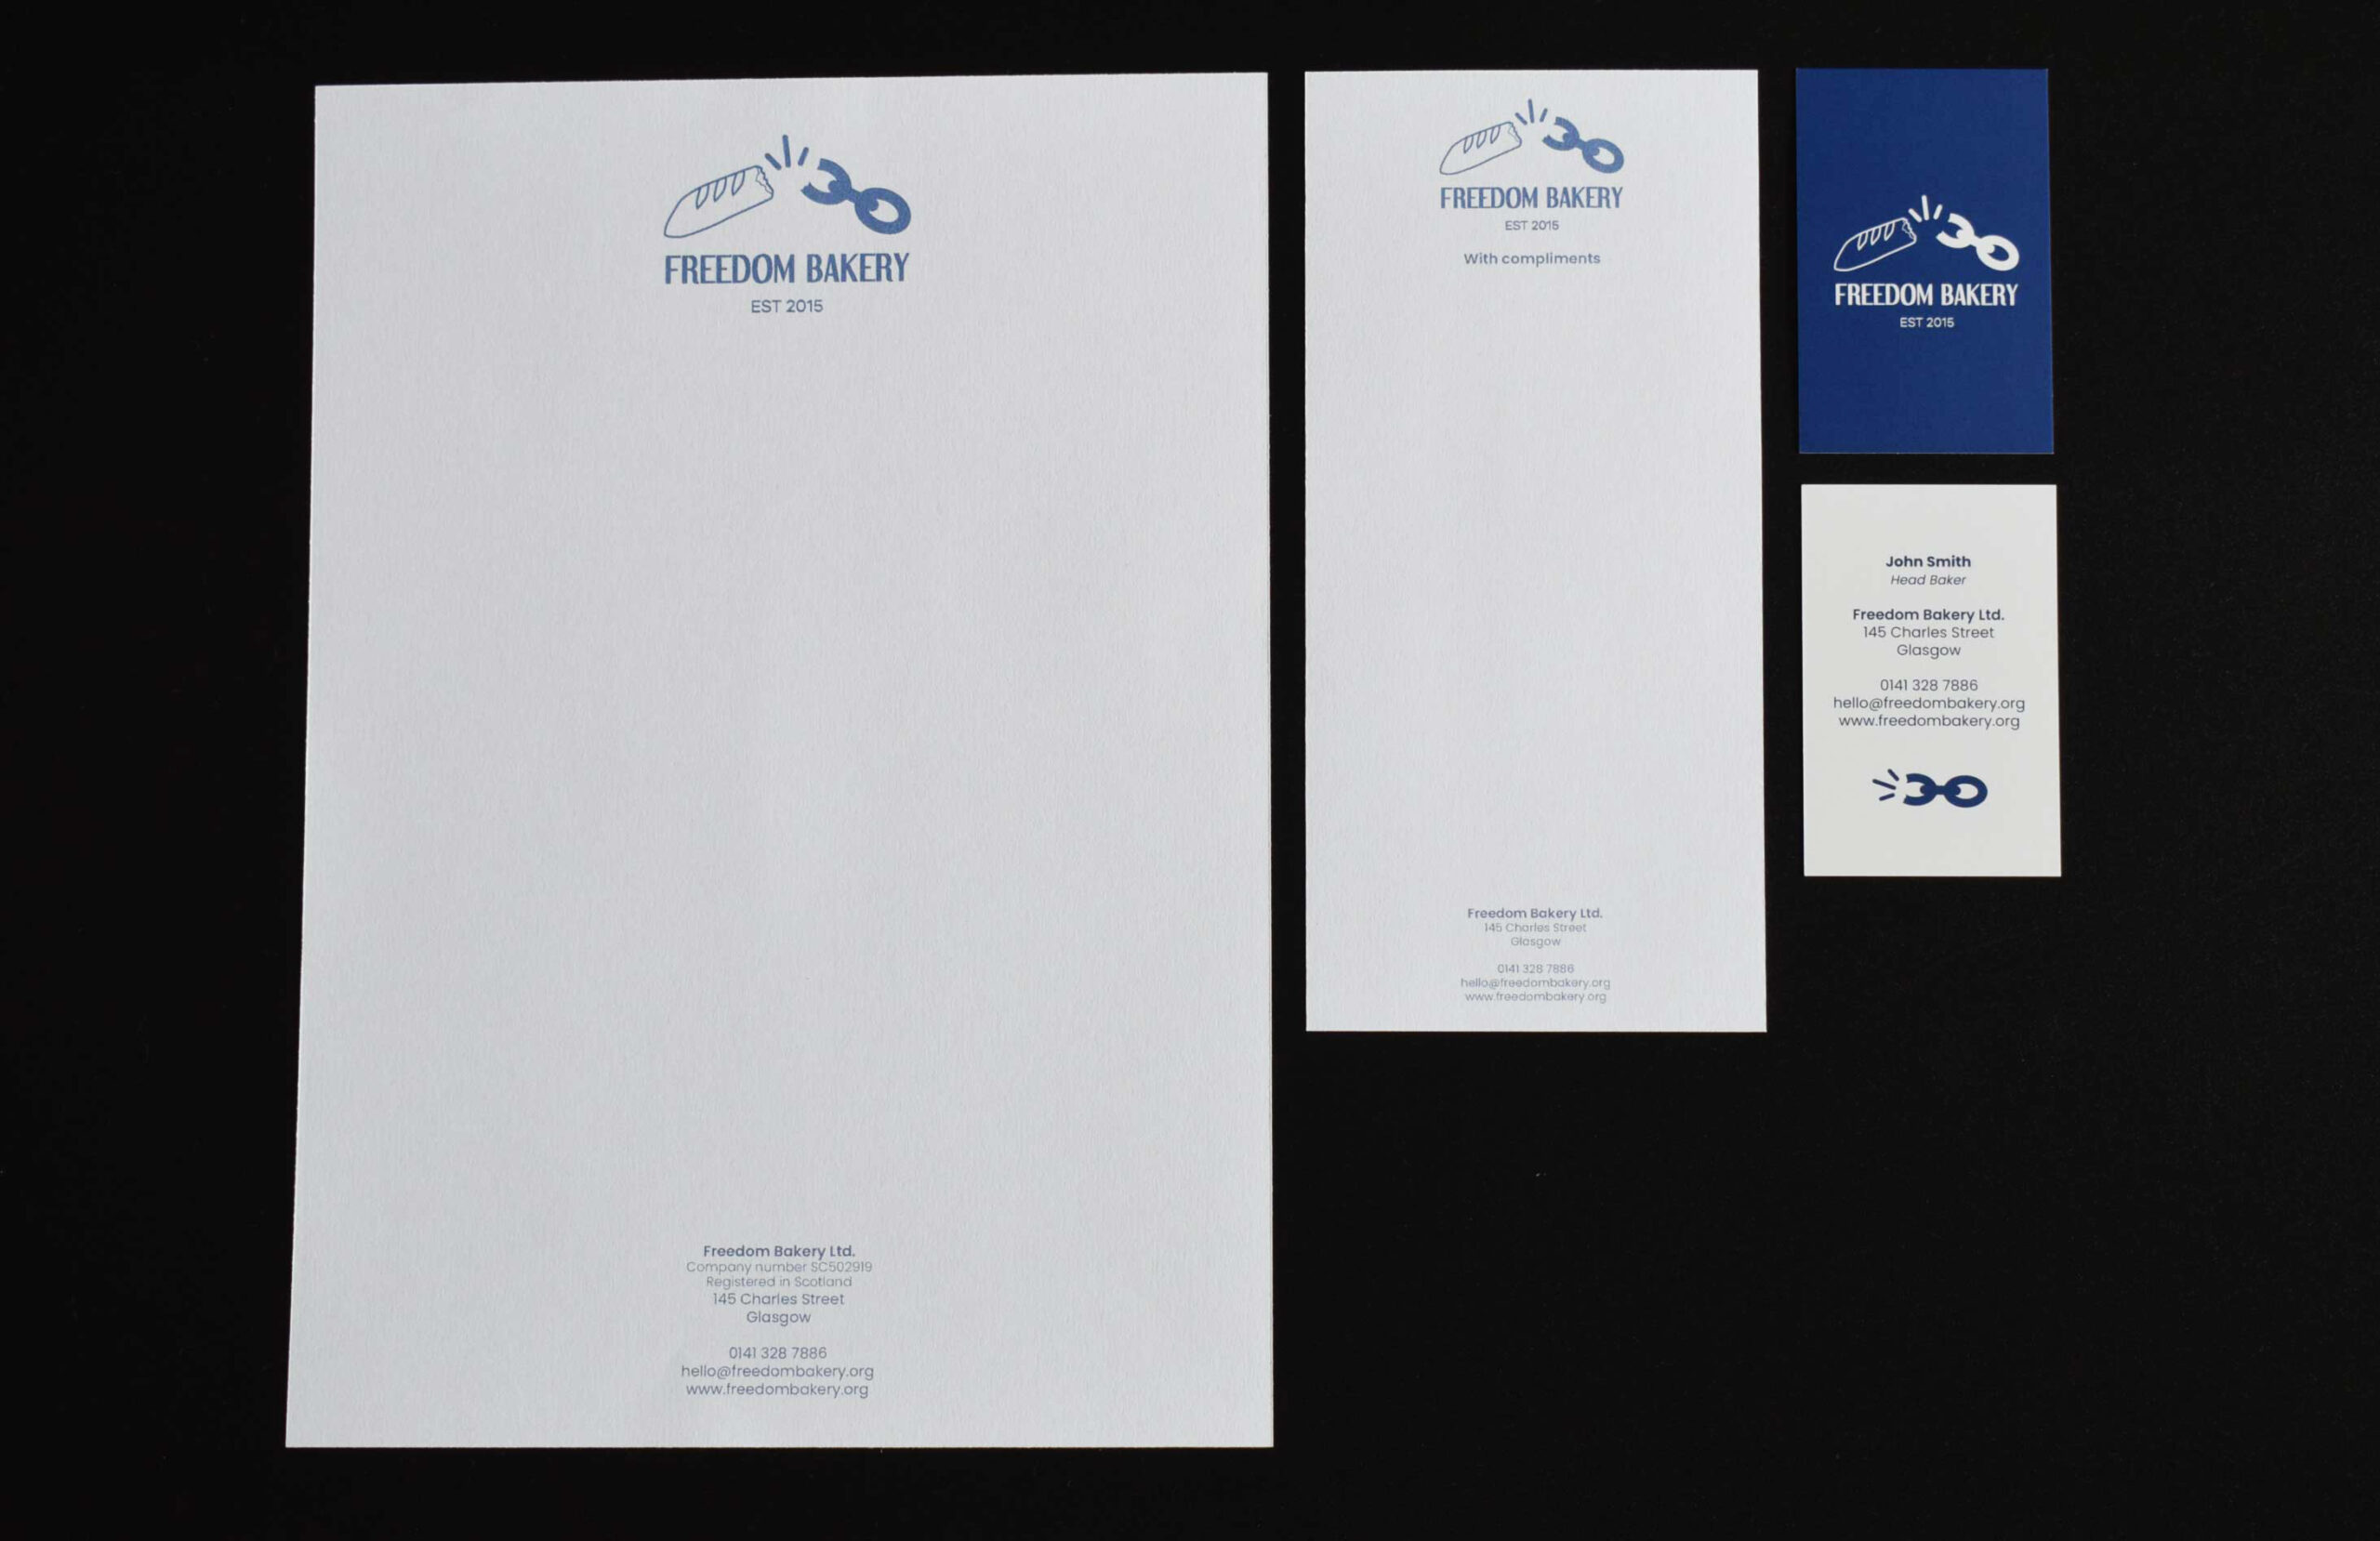 Business stationery designs for Freedom Bakery